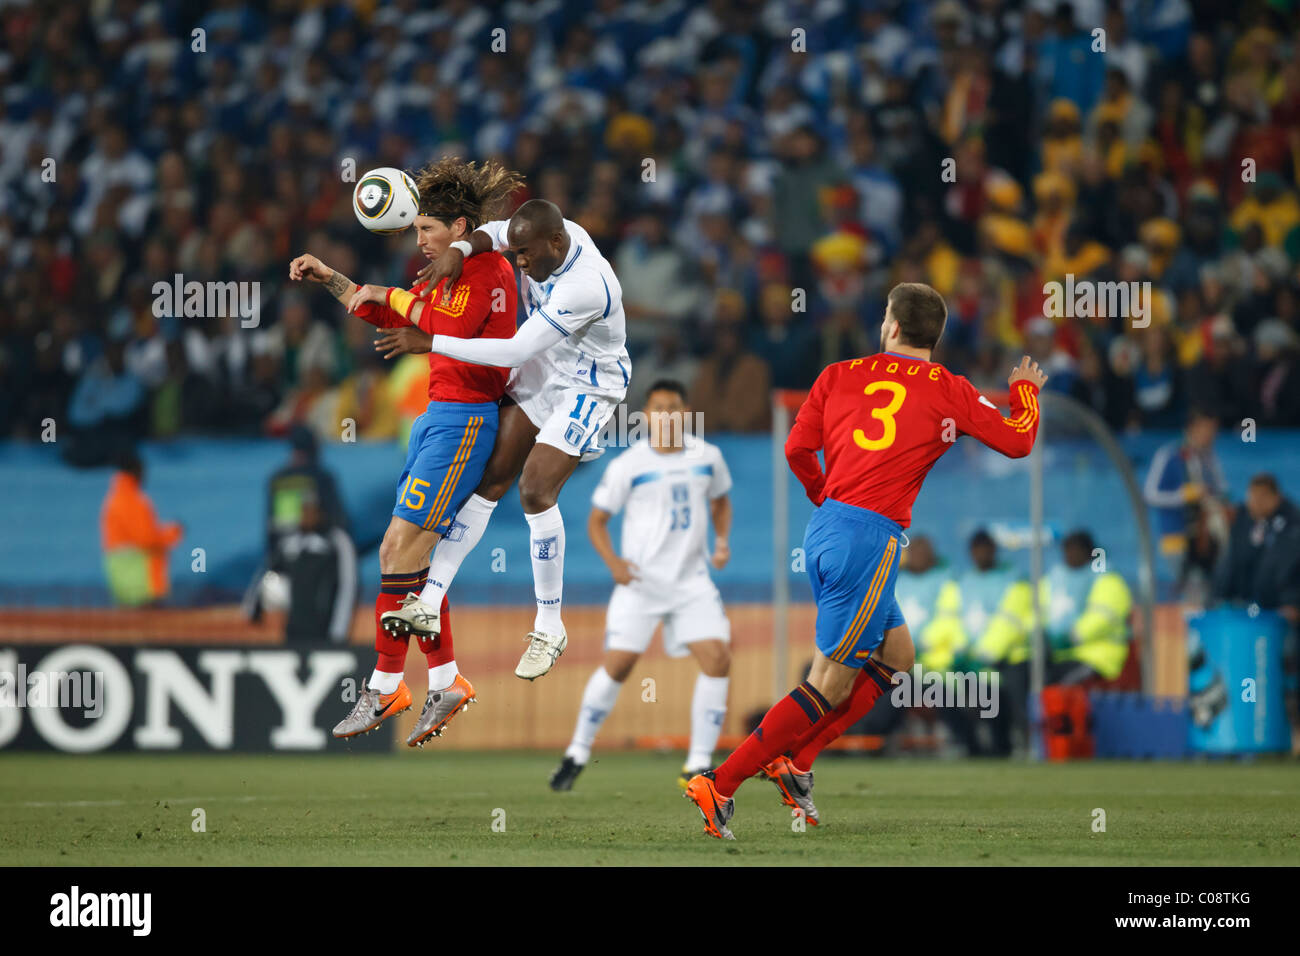 Sergio Ramos of Spain (15) jumps for a header against David Suazo of Honduras (11) during a 2010 FIFA World Cup match. Stock Photo